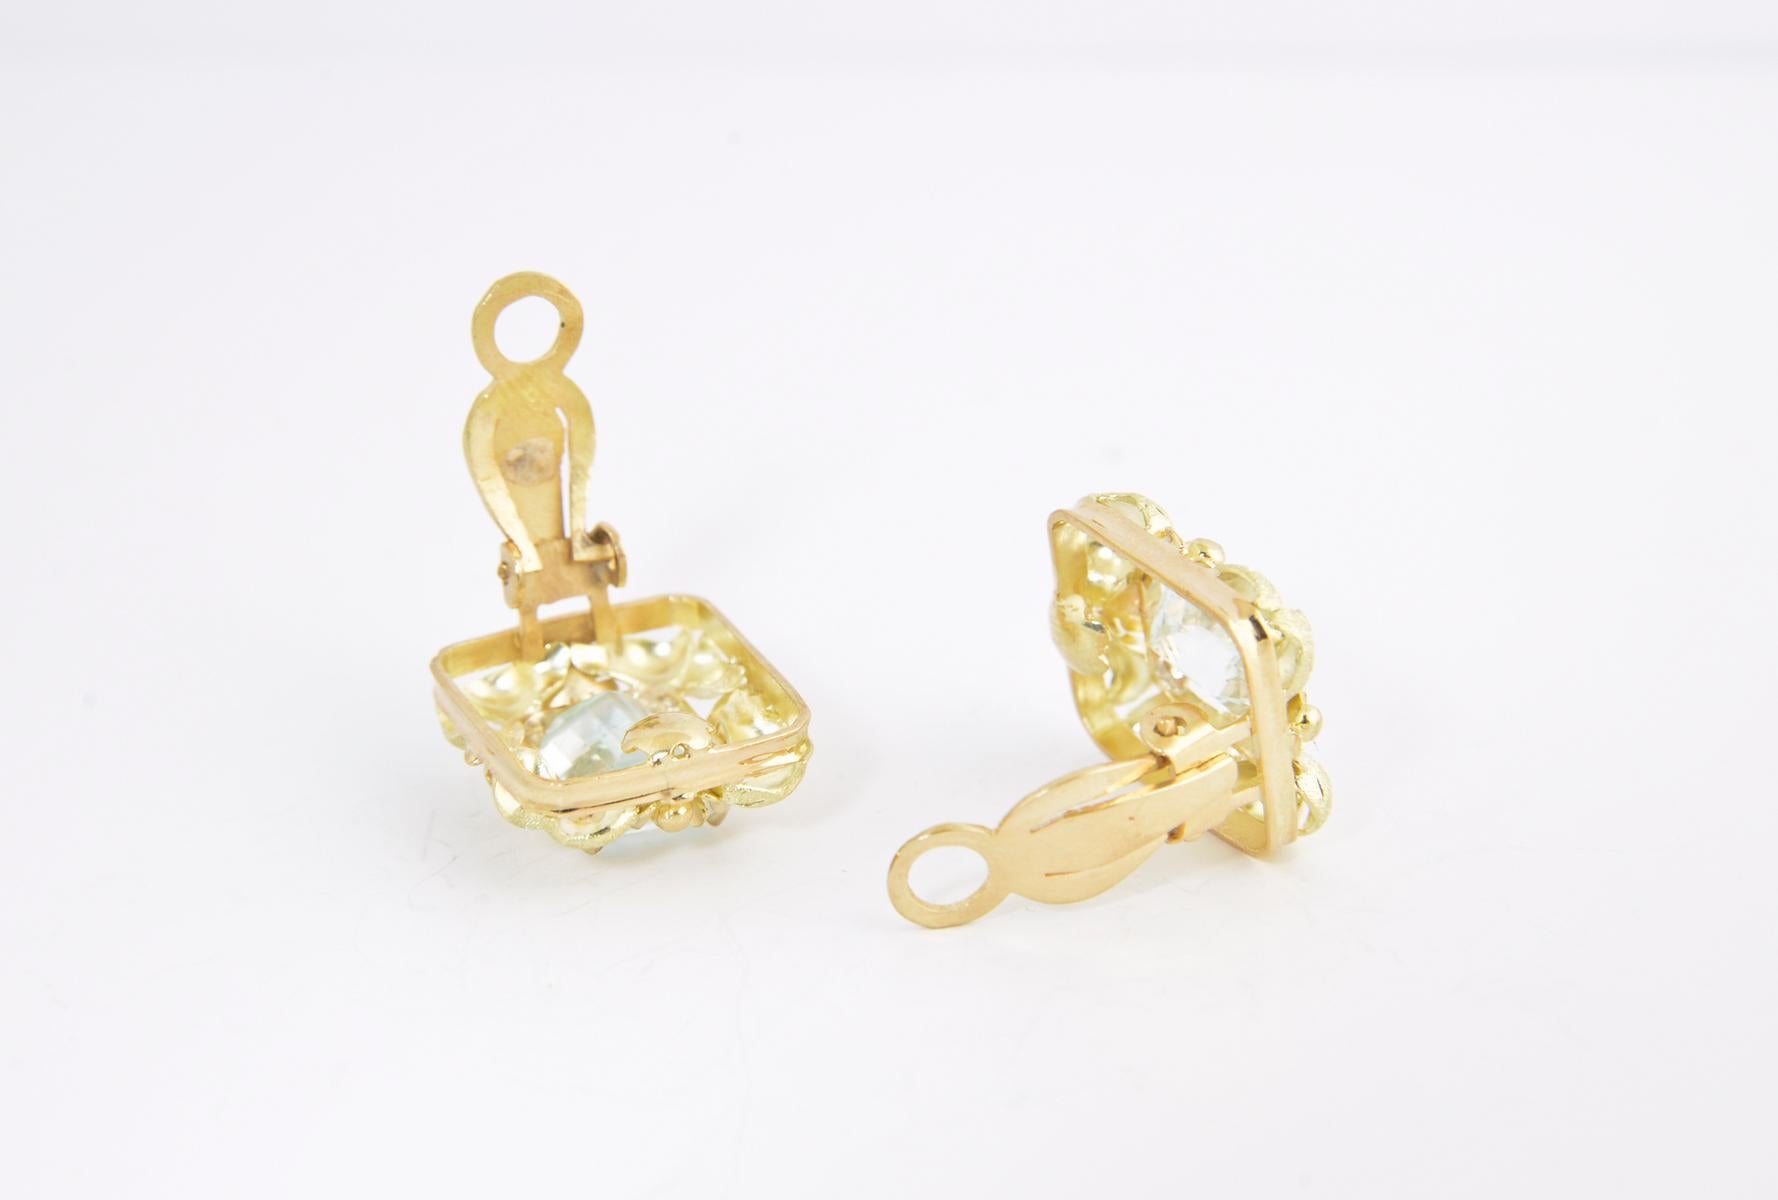 18K green and rose gold frame earrings with flowers and leaves surrounding emerald-cut aquamarine centers. Clip backs.
